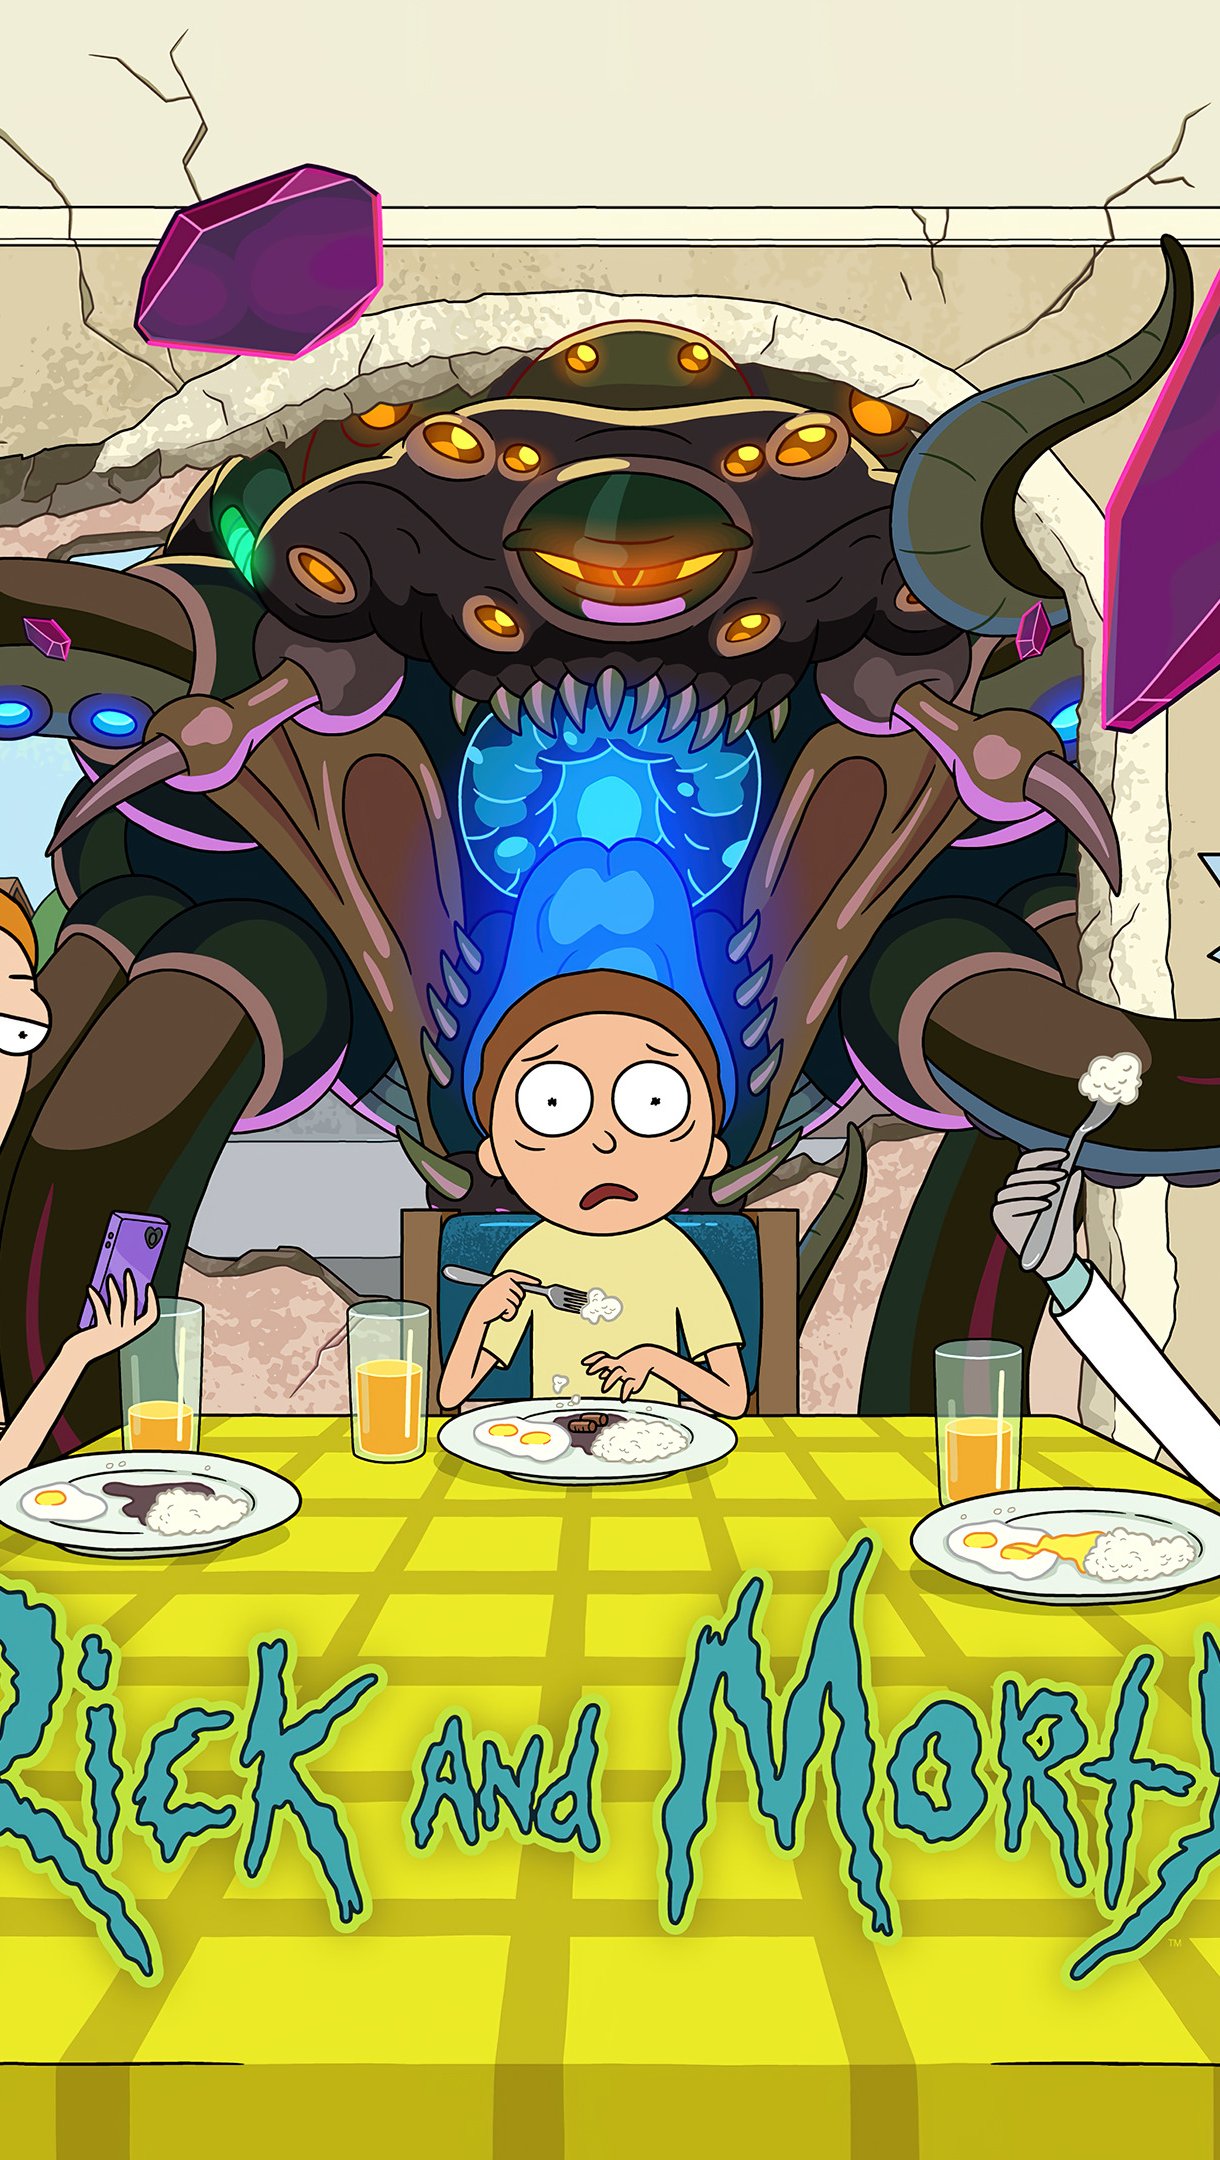 Wallpaper Rick and Morty Family Vertical